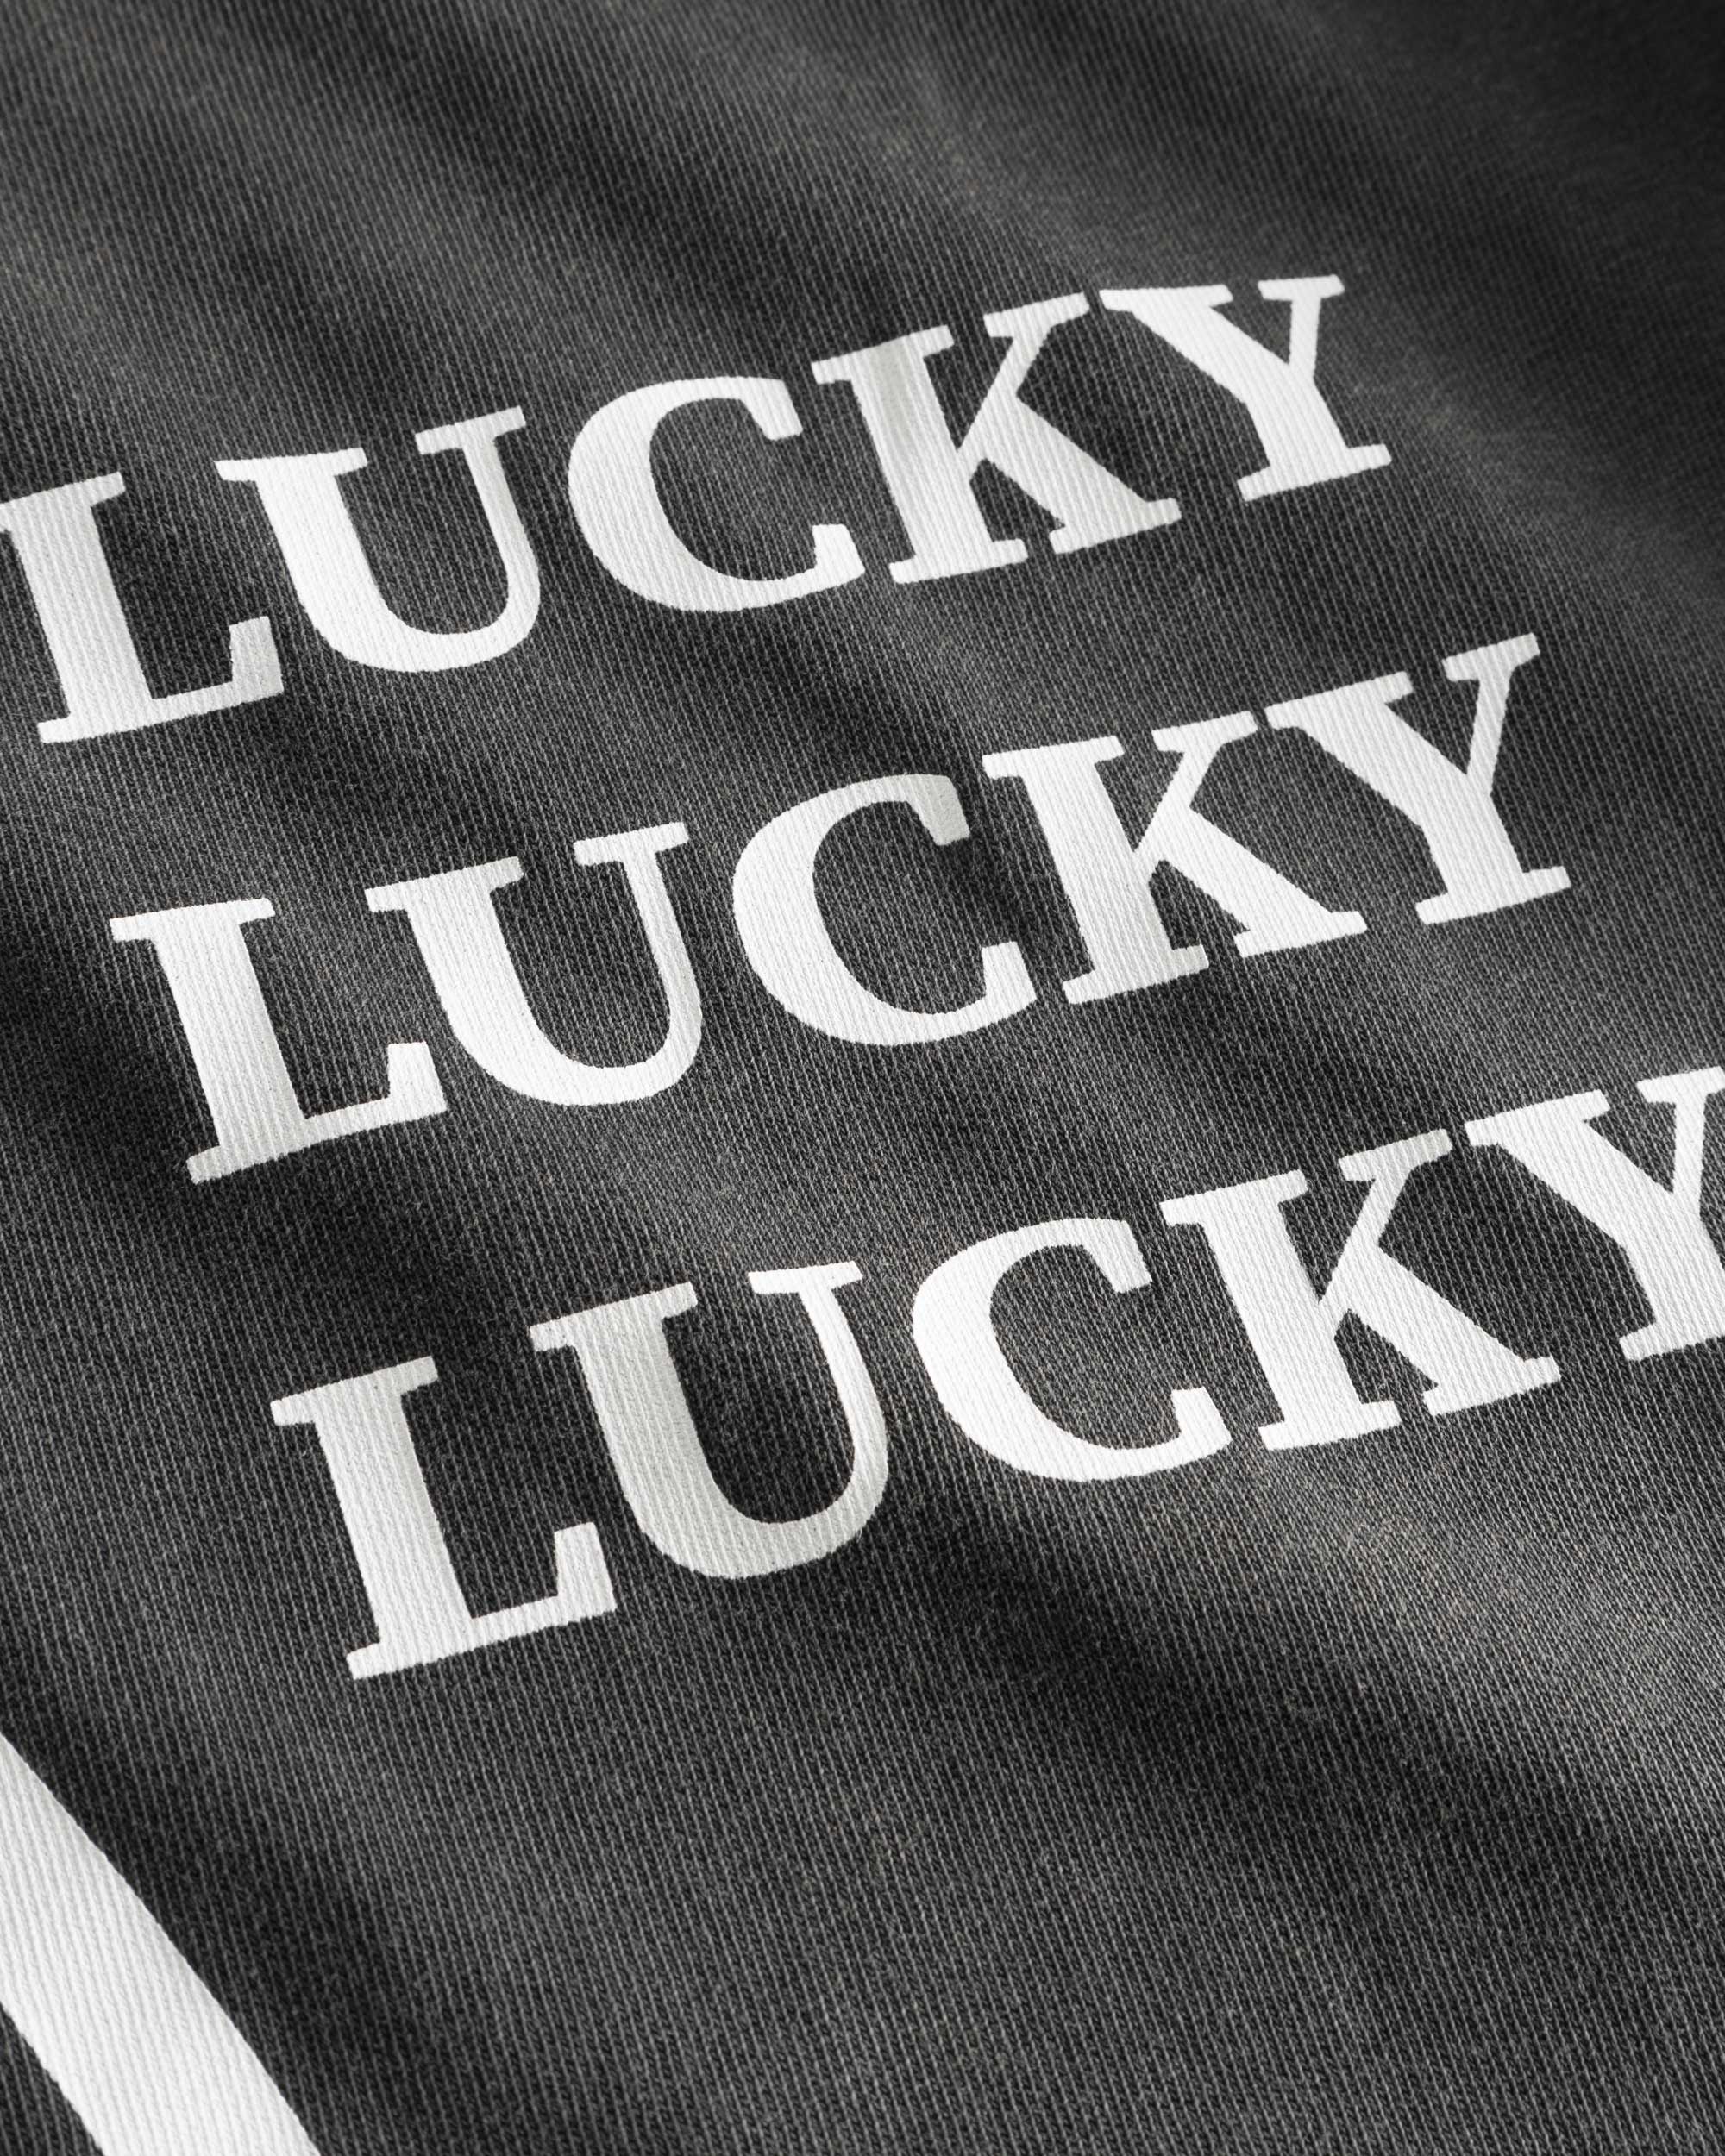 White "Lucky" text print on washed black t-shirt.